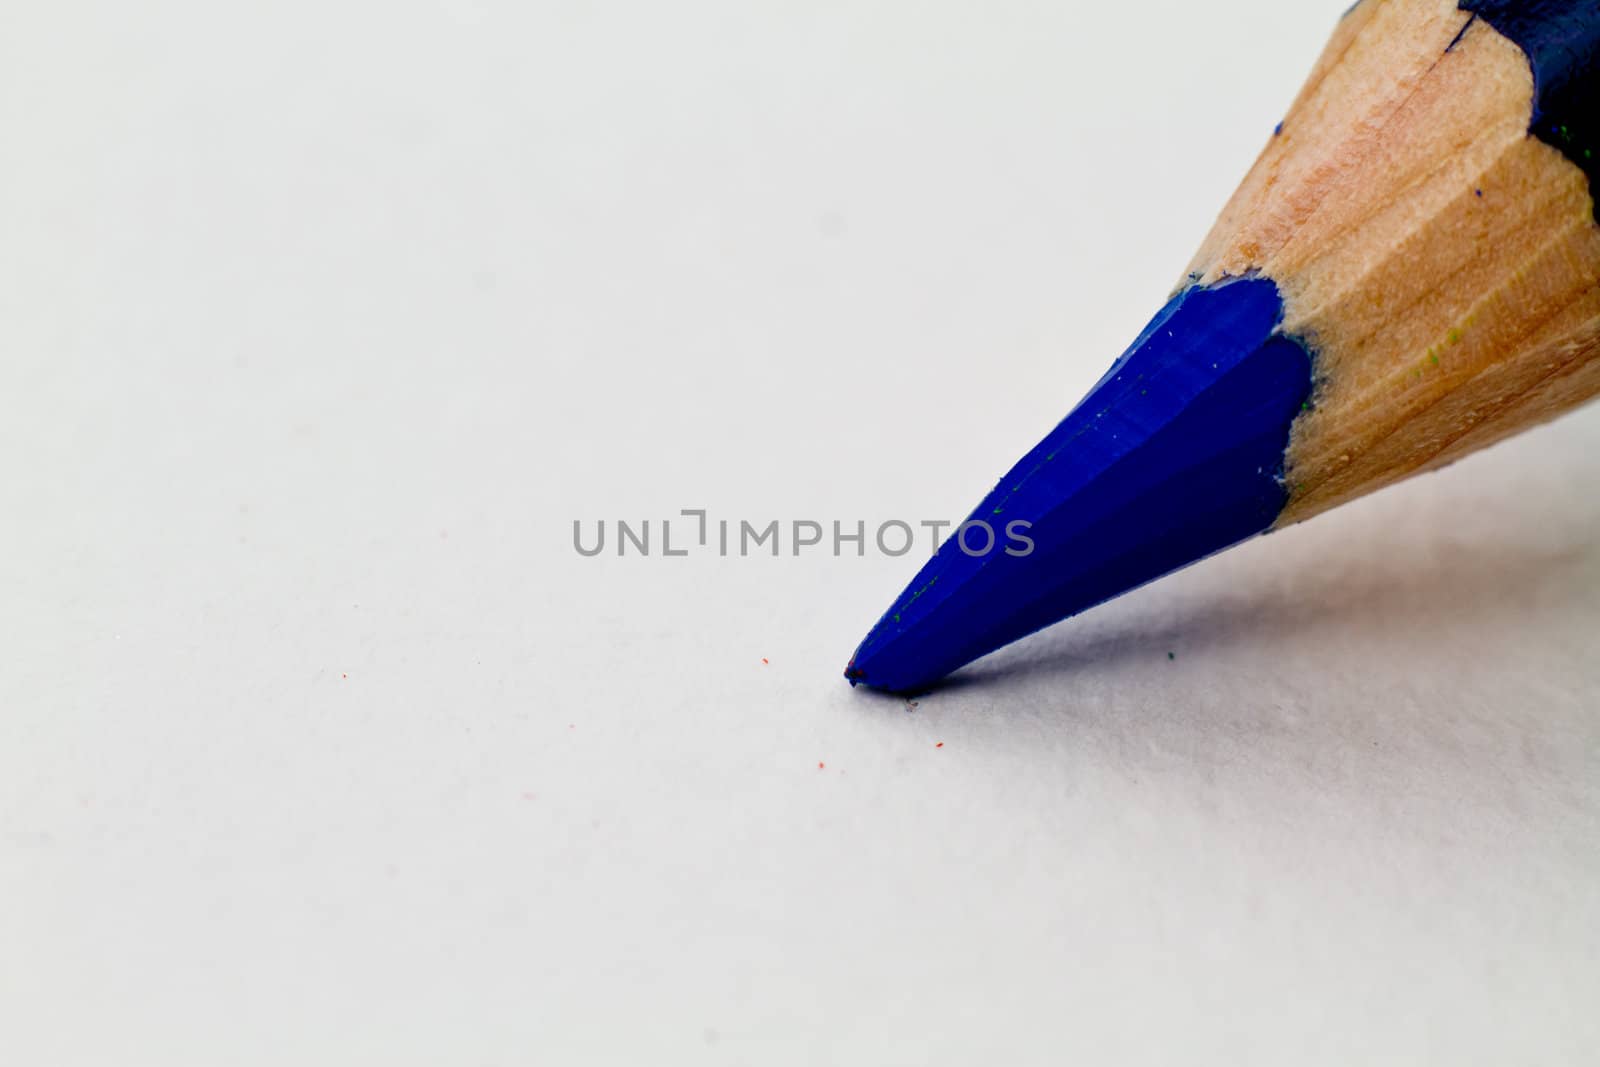 Close up of a Blue water soluble pencil tip.